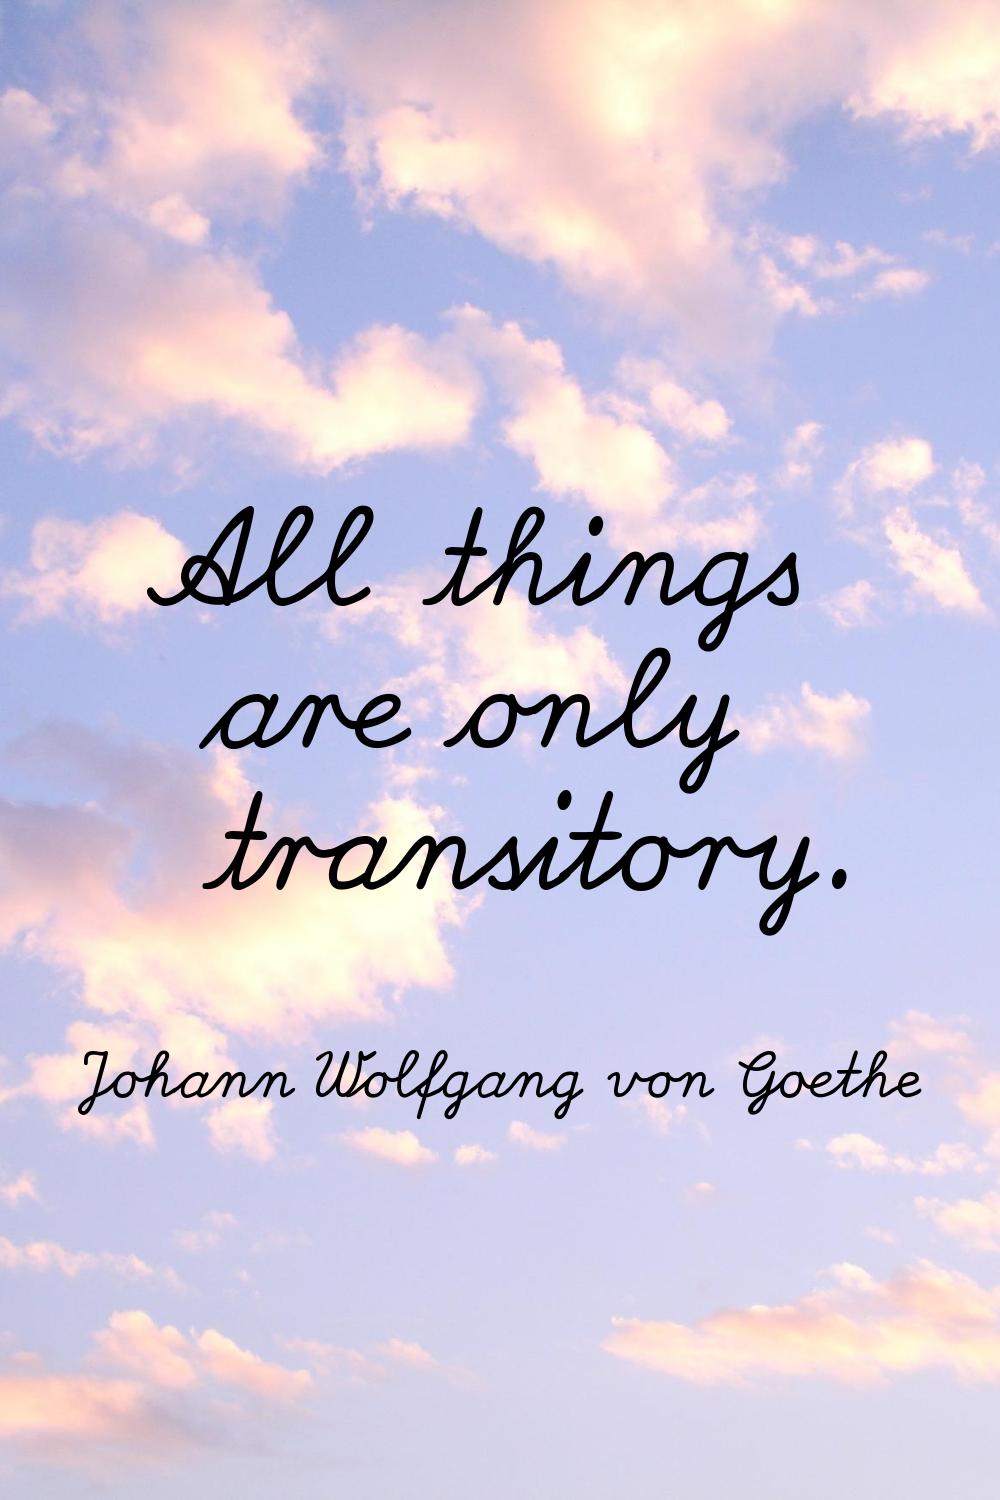 All things are only transitory.